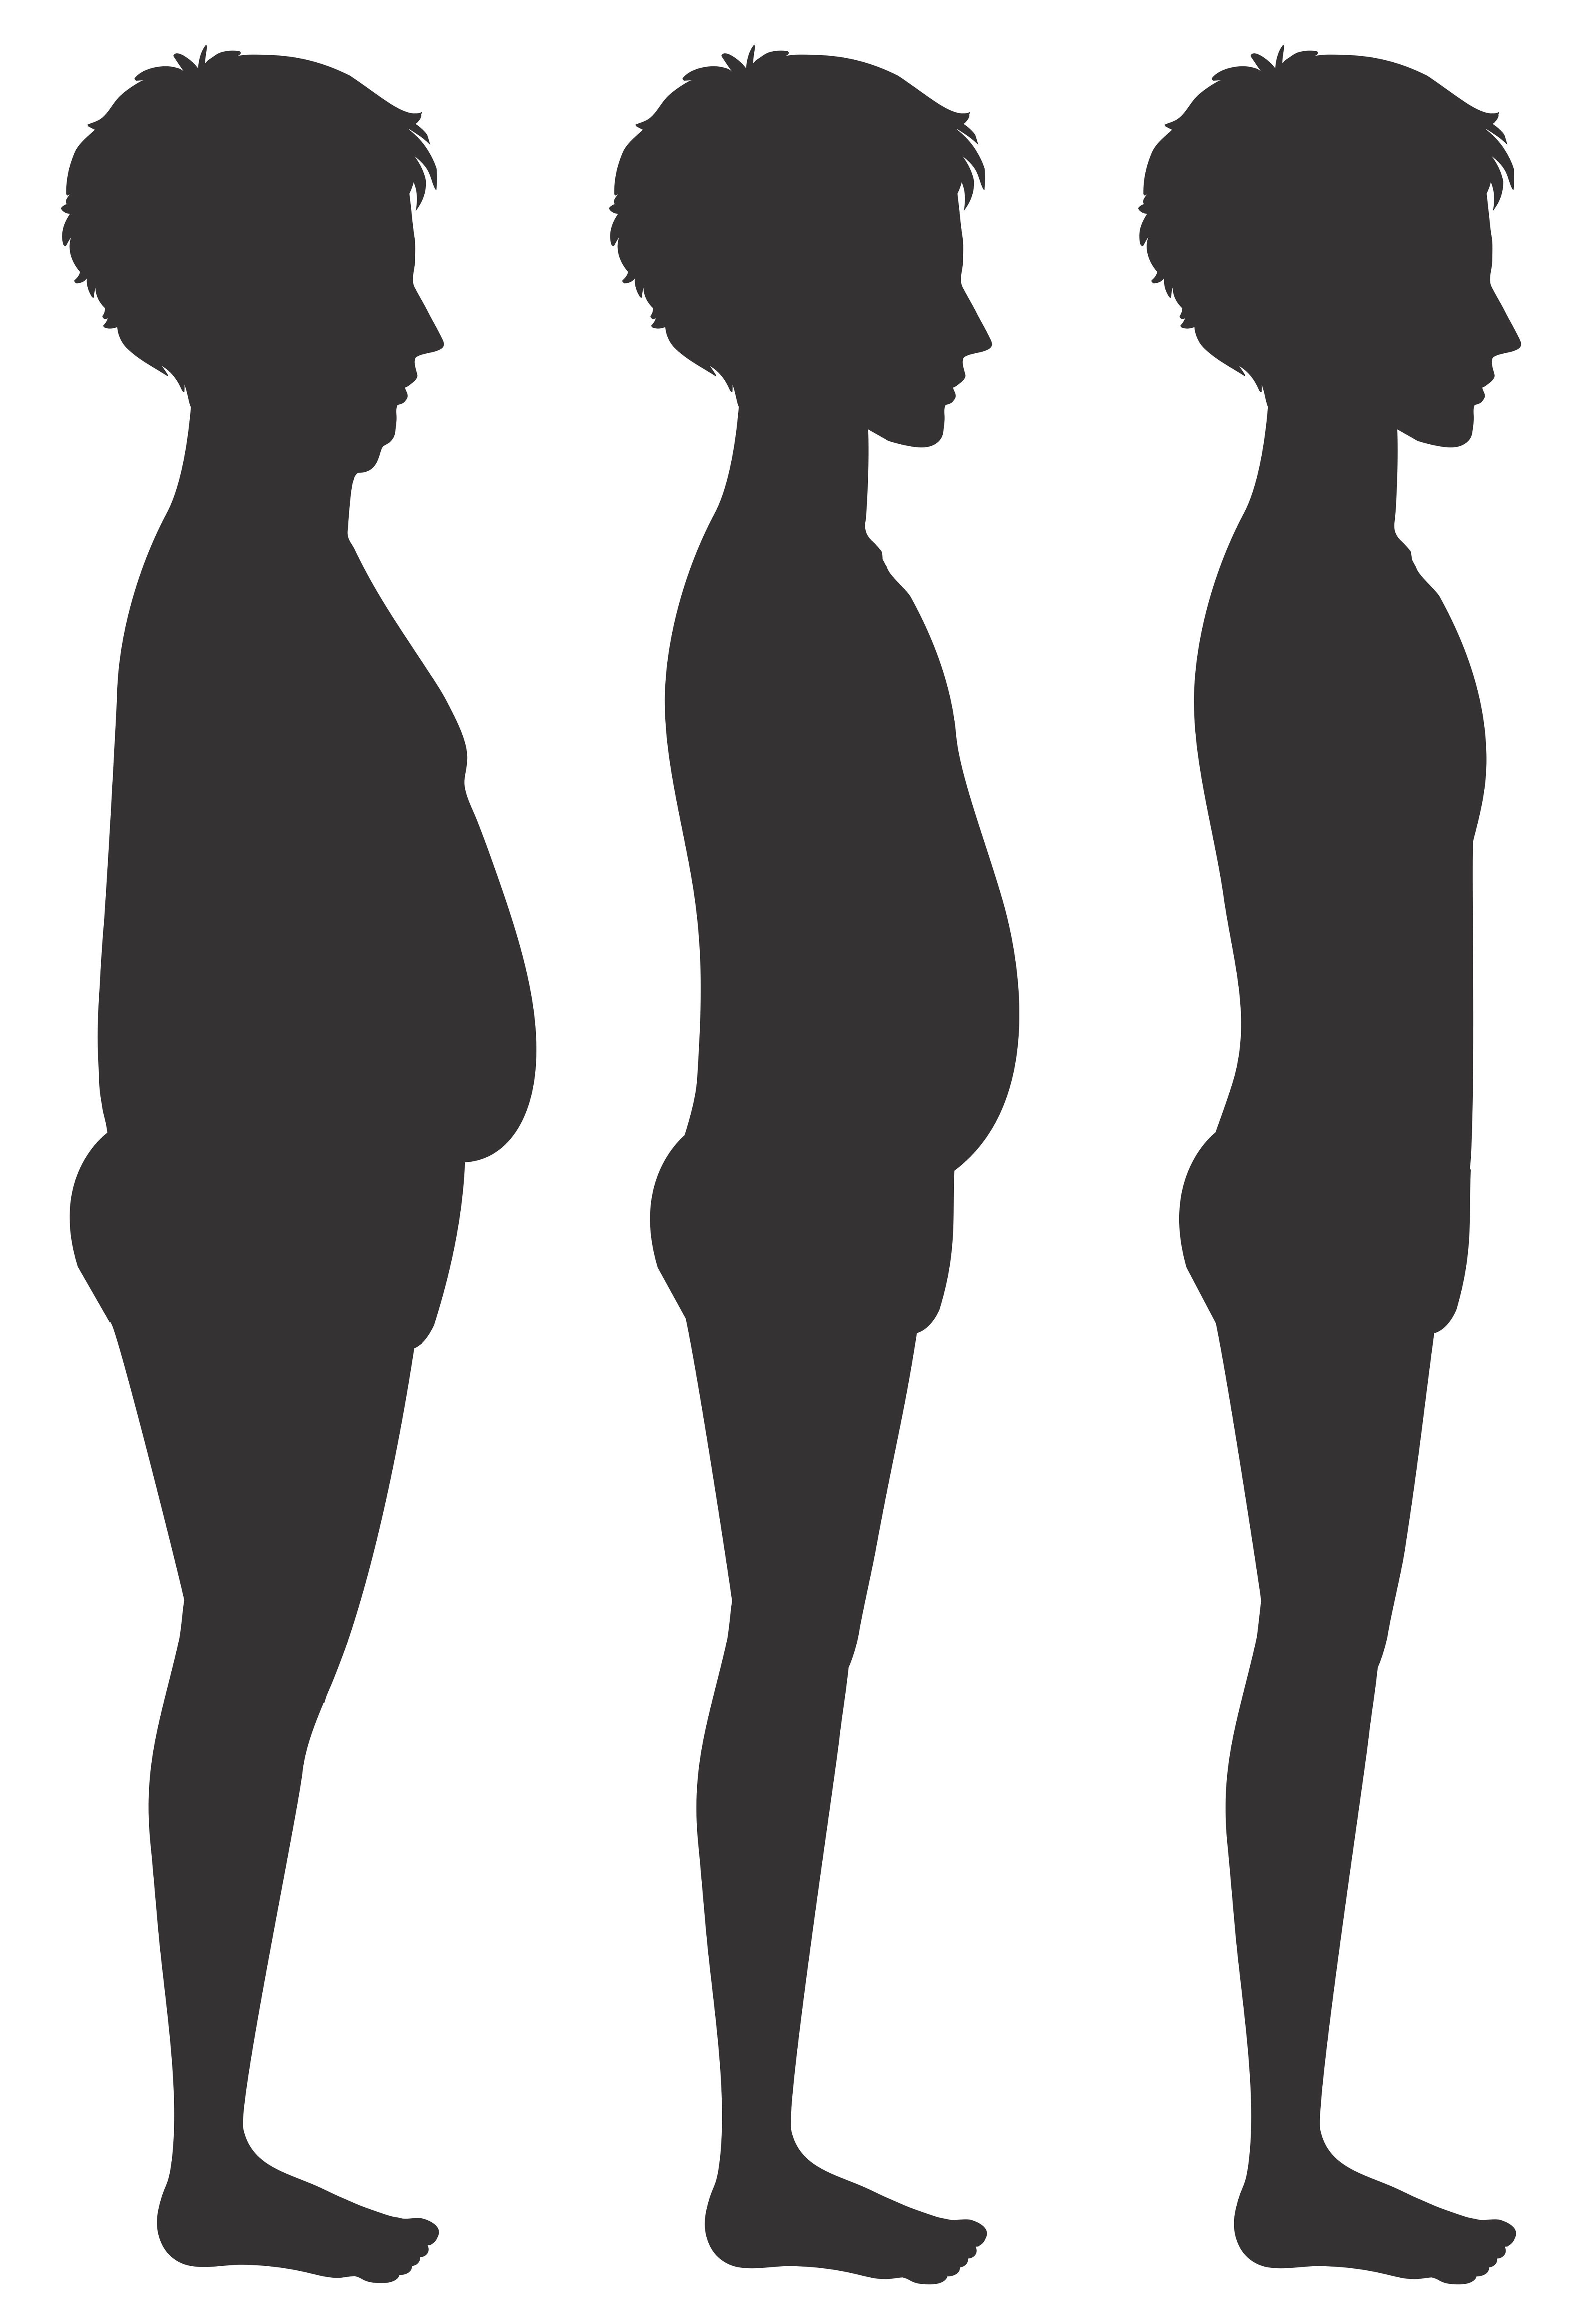 Download Human Body Silhouette Free Vector Art - (12827 Free Downloads)